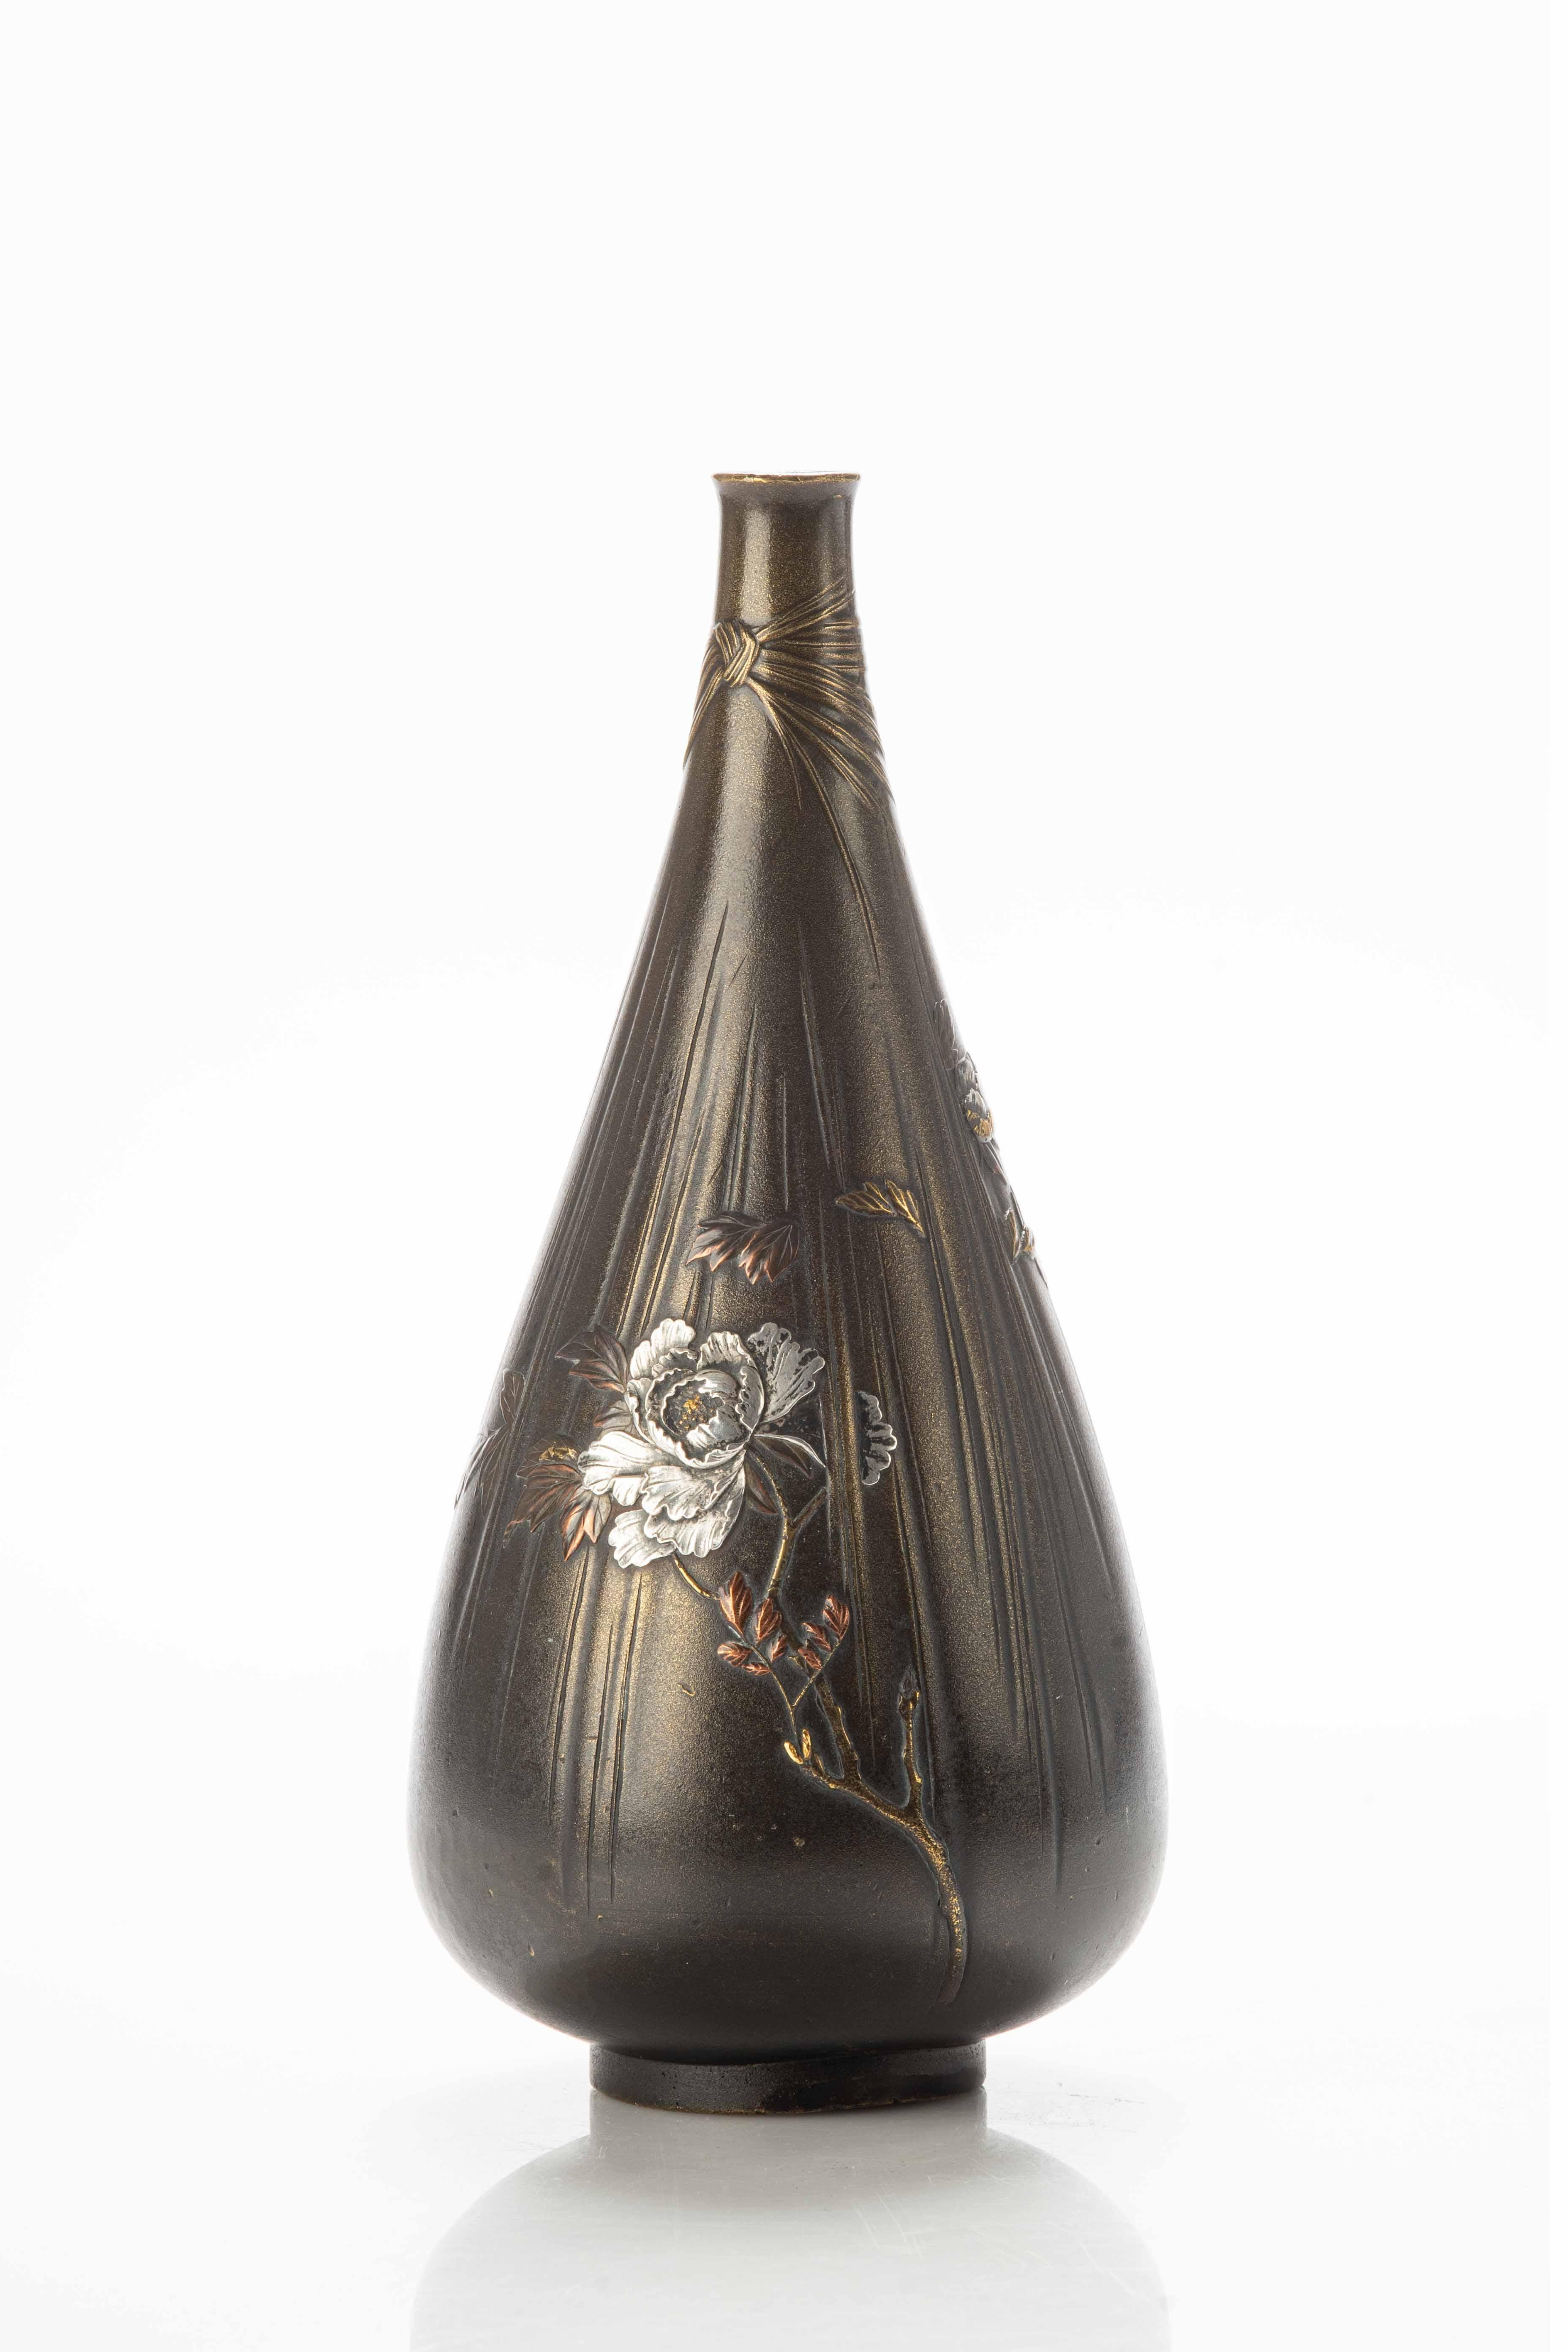 Drop-shaped bronze vase, with peonies in relief, decorated to simulate a delicate and light fabric that ends with a bow near the top of the neck.

Using mixed metals to create visual contrasts adds depth and beauty.

Signed Gyokkō 玉光 on the side of